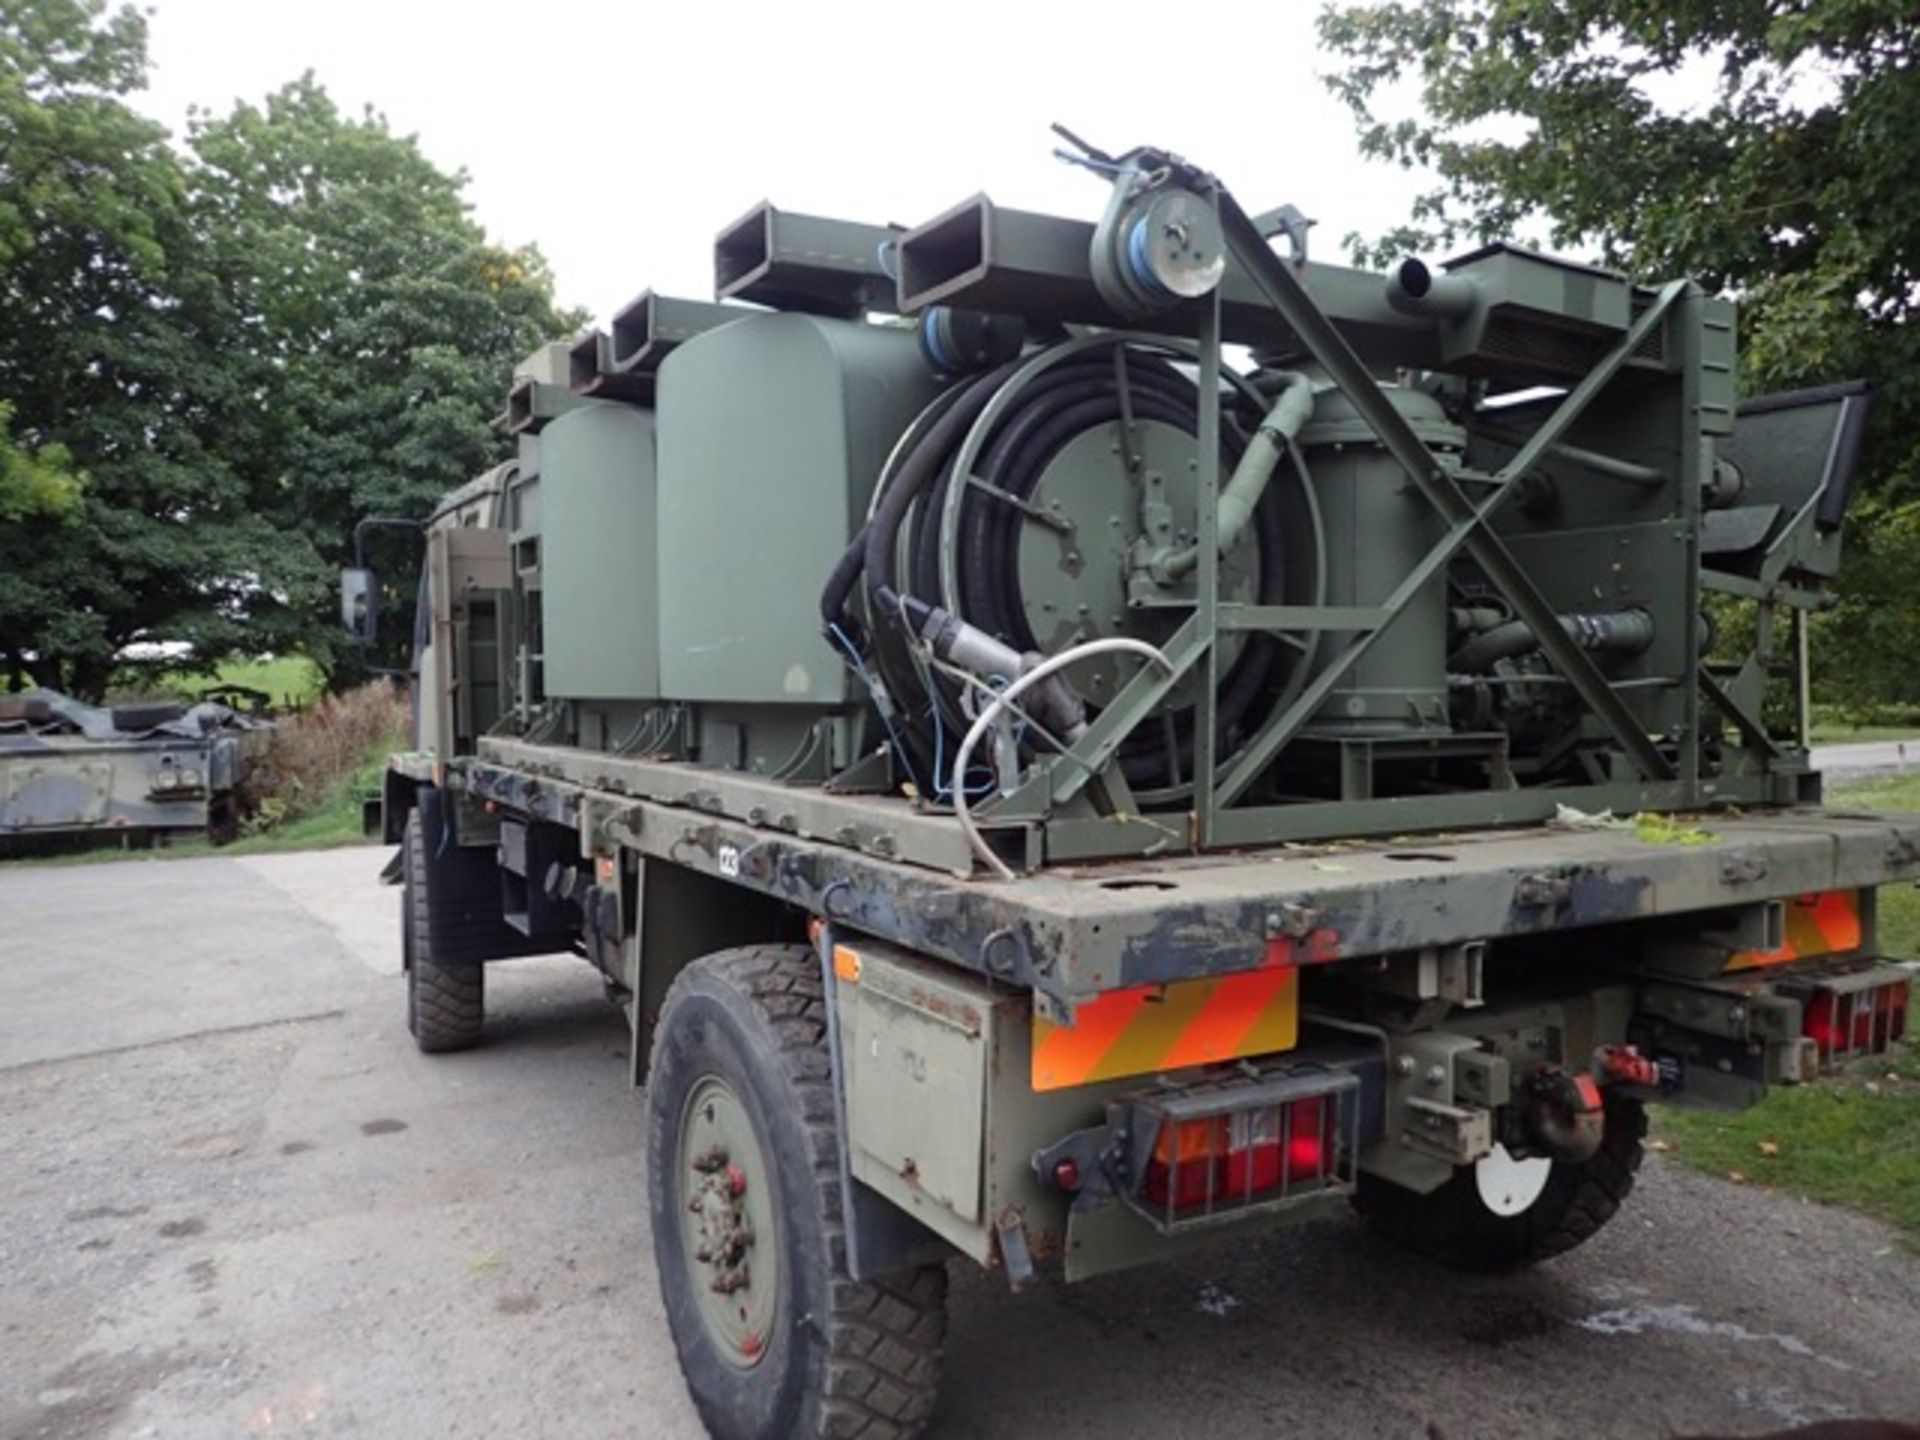 DAF 45-150 4x4 refuel wagon (Ex MOD) S/N: 123435 Recorded Mileage: 3182 c/w discharge hoses, - Image 3 of 10